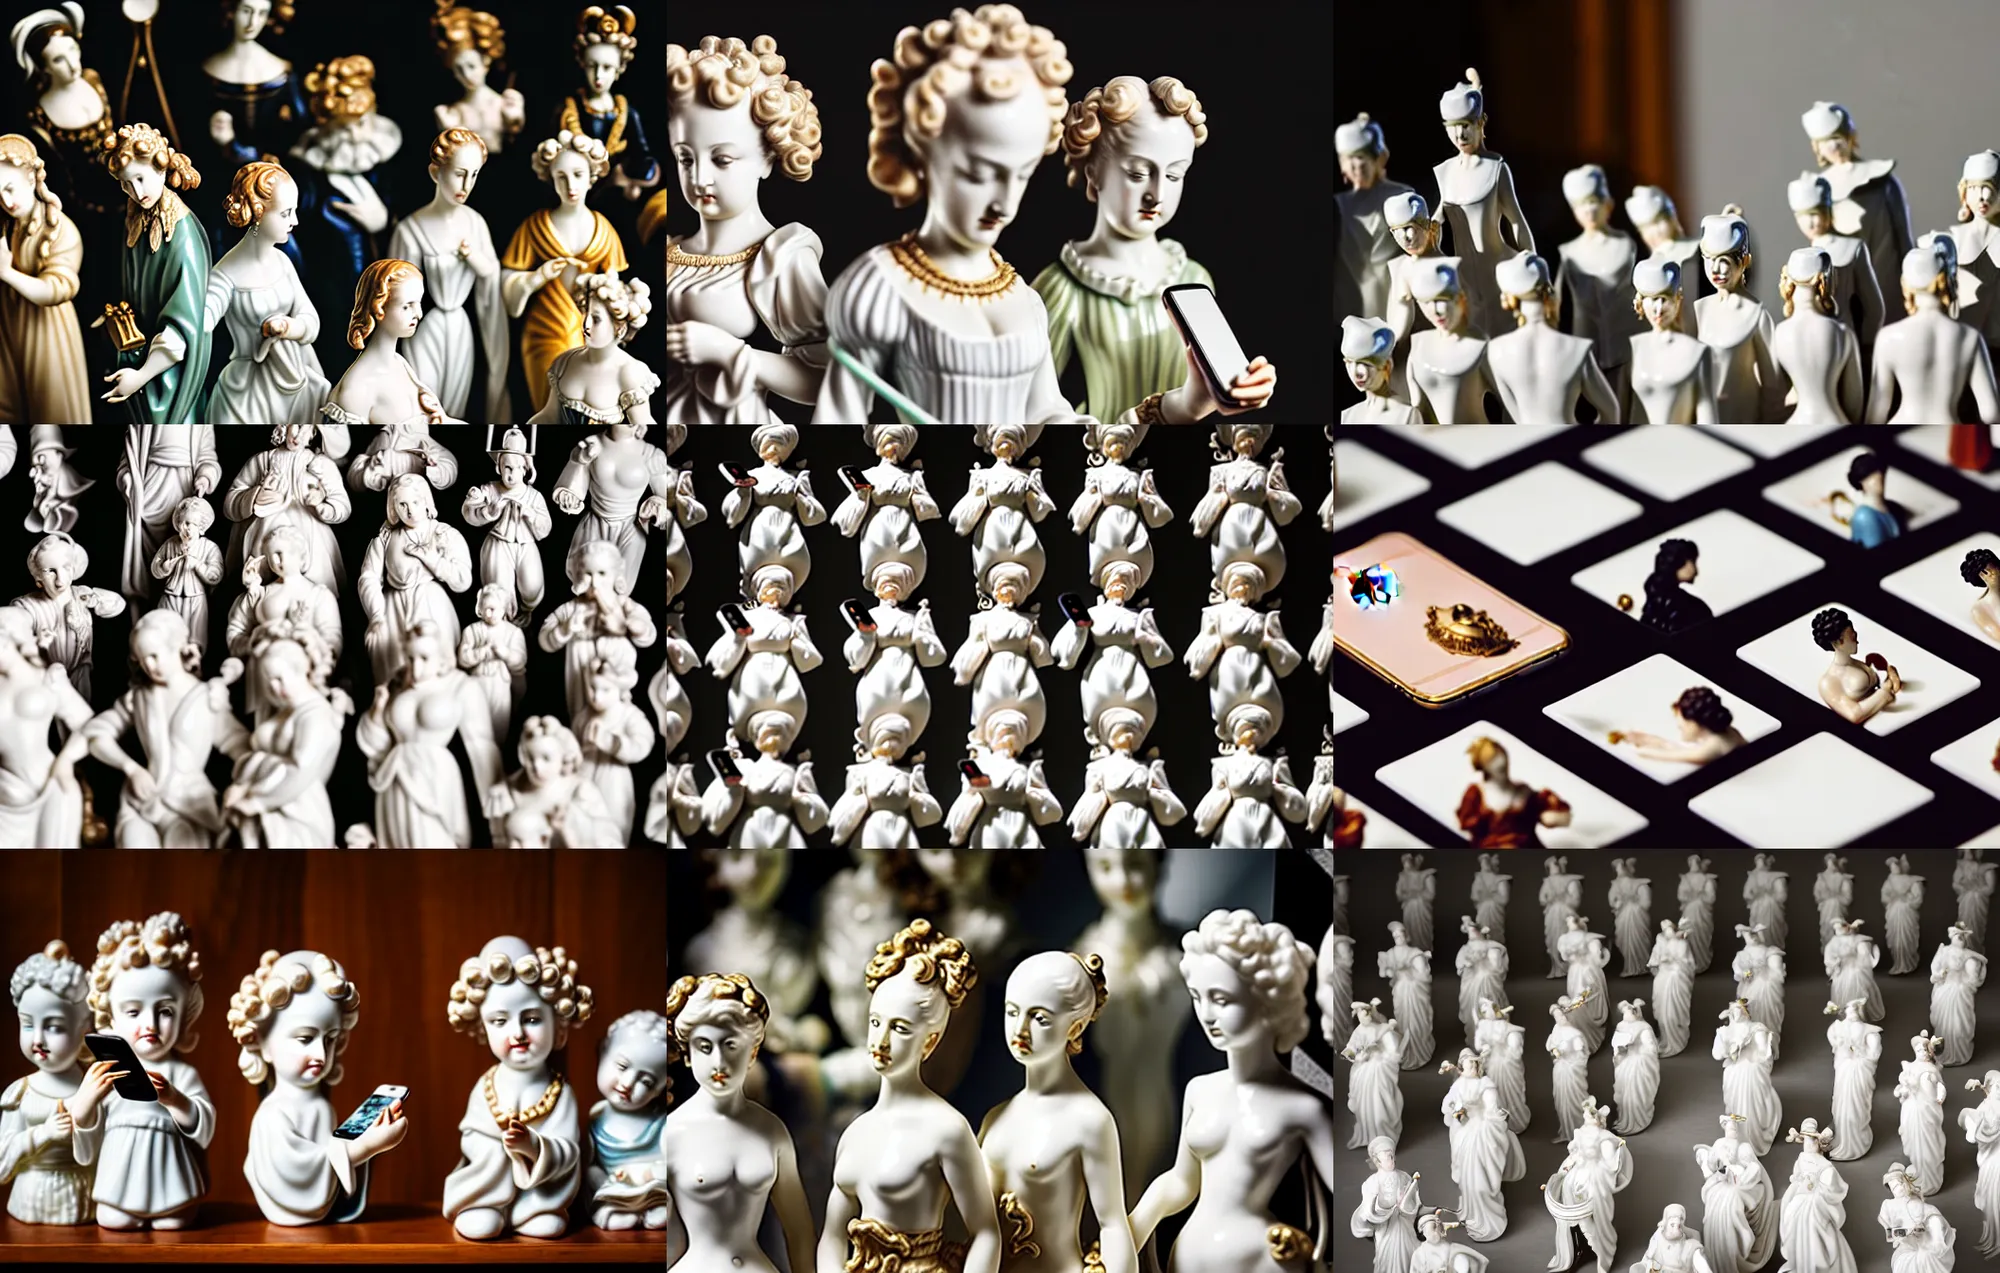 Prompt: A close up photo of porcelain composition of baroque figurines staring down at their iphones